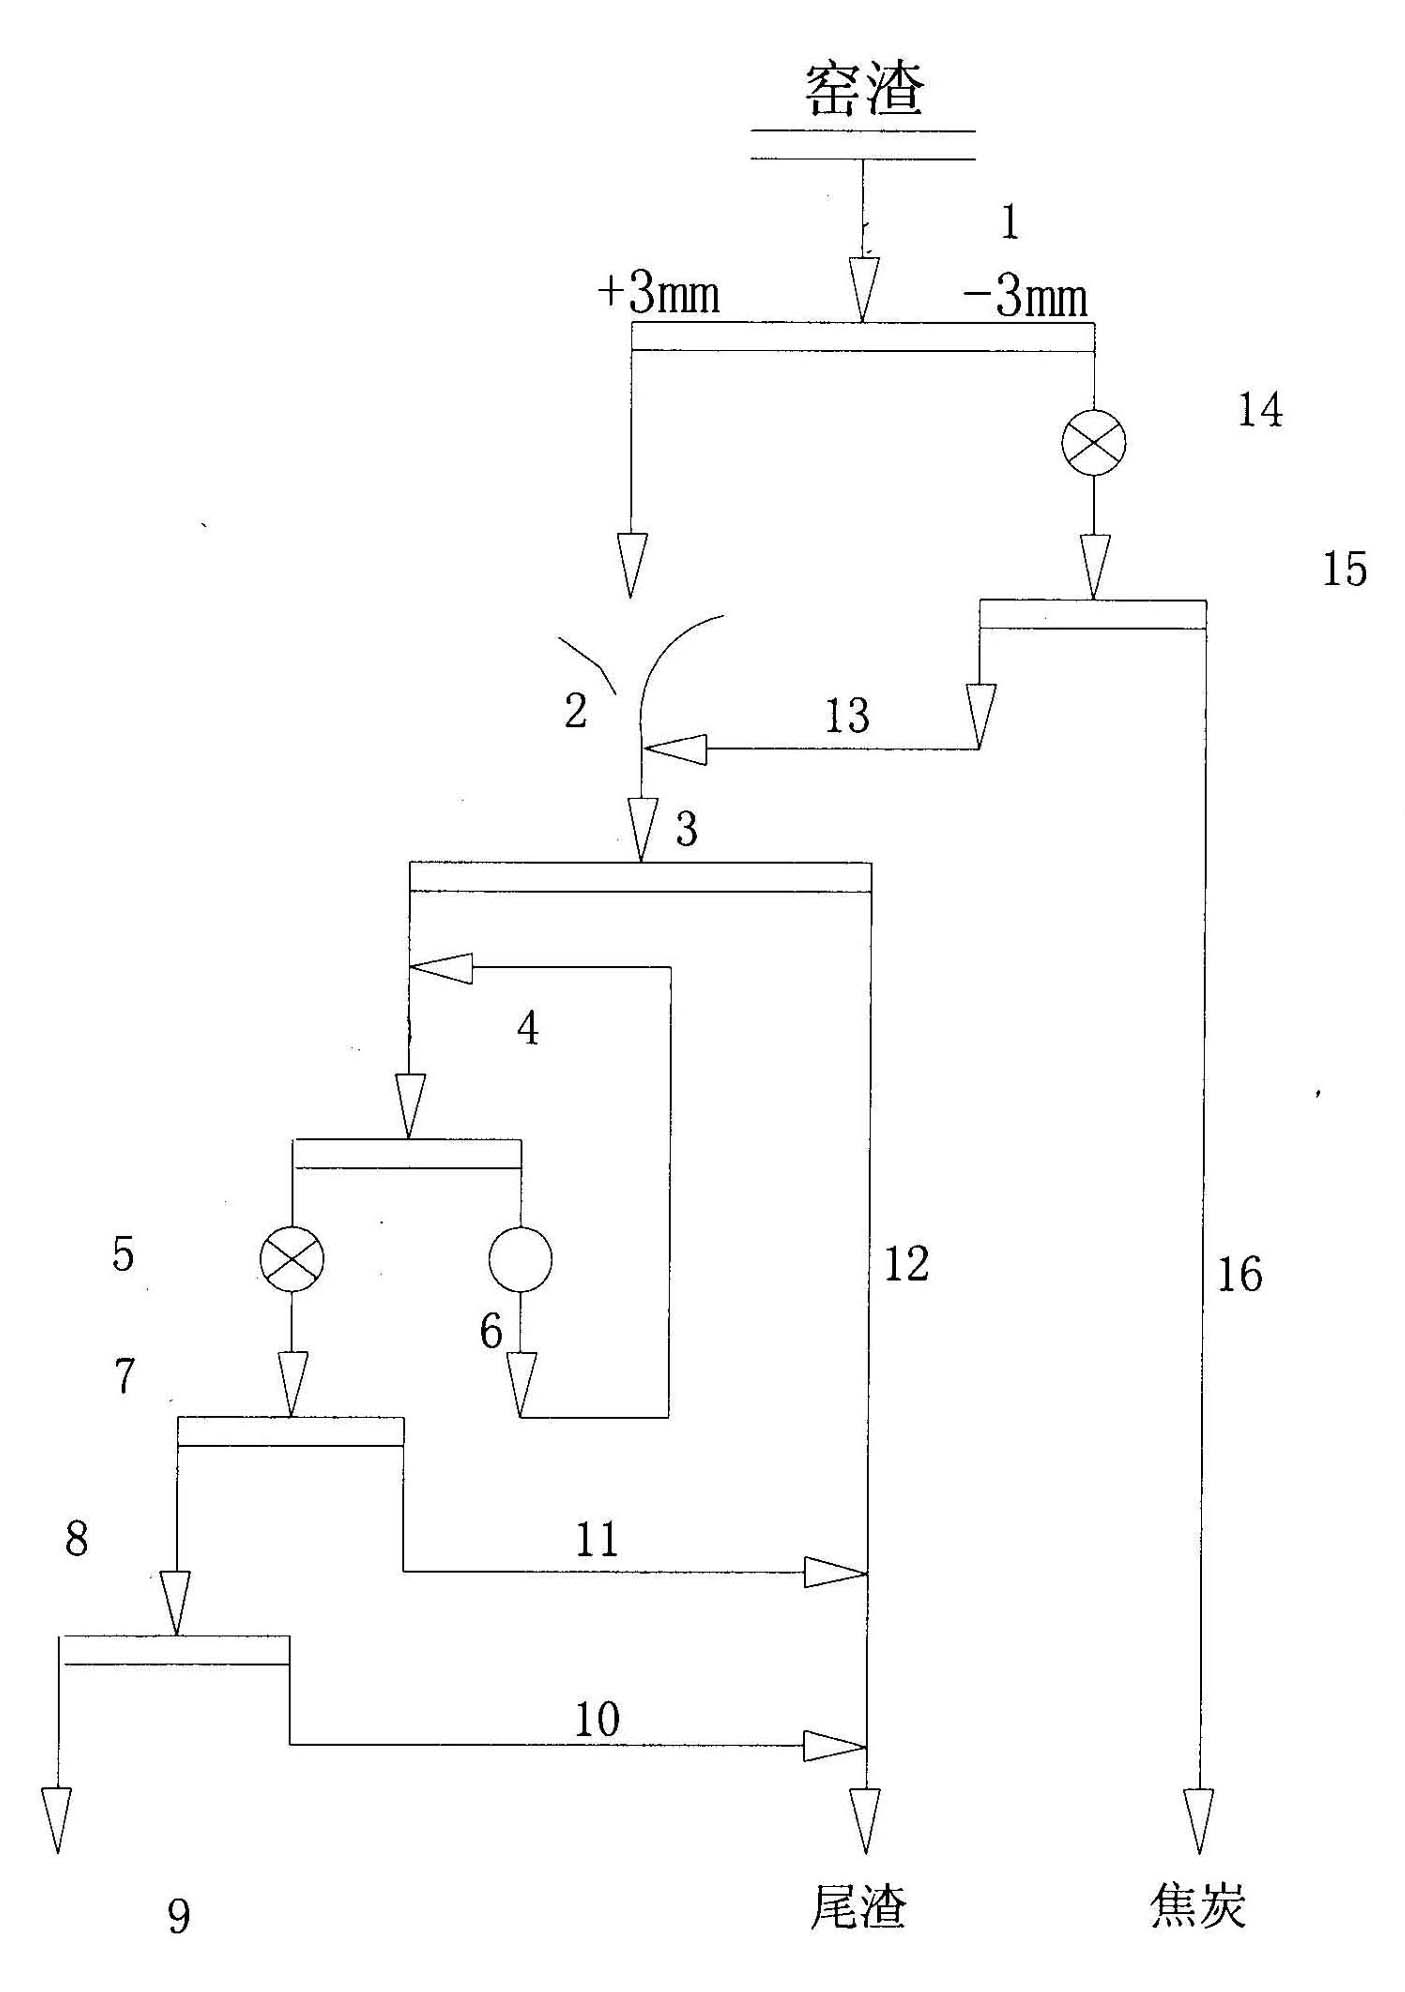 Process for magnetically separating and recovering iron and carbon from zinc volatilization kiln slag through dry method